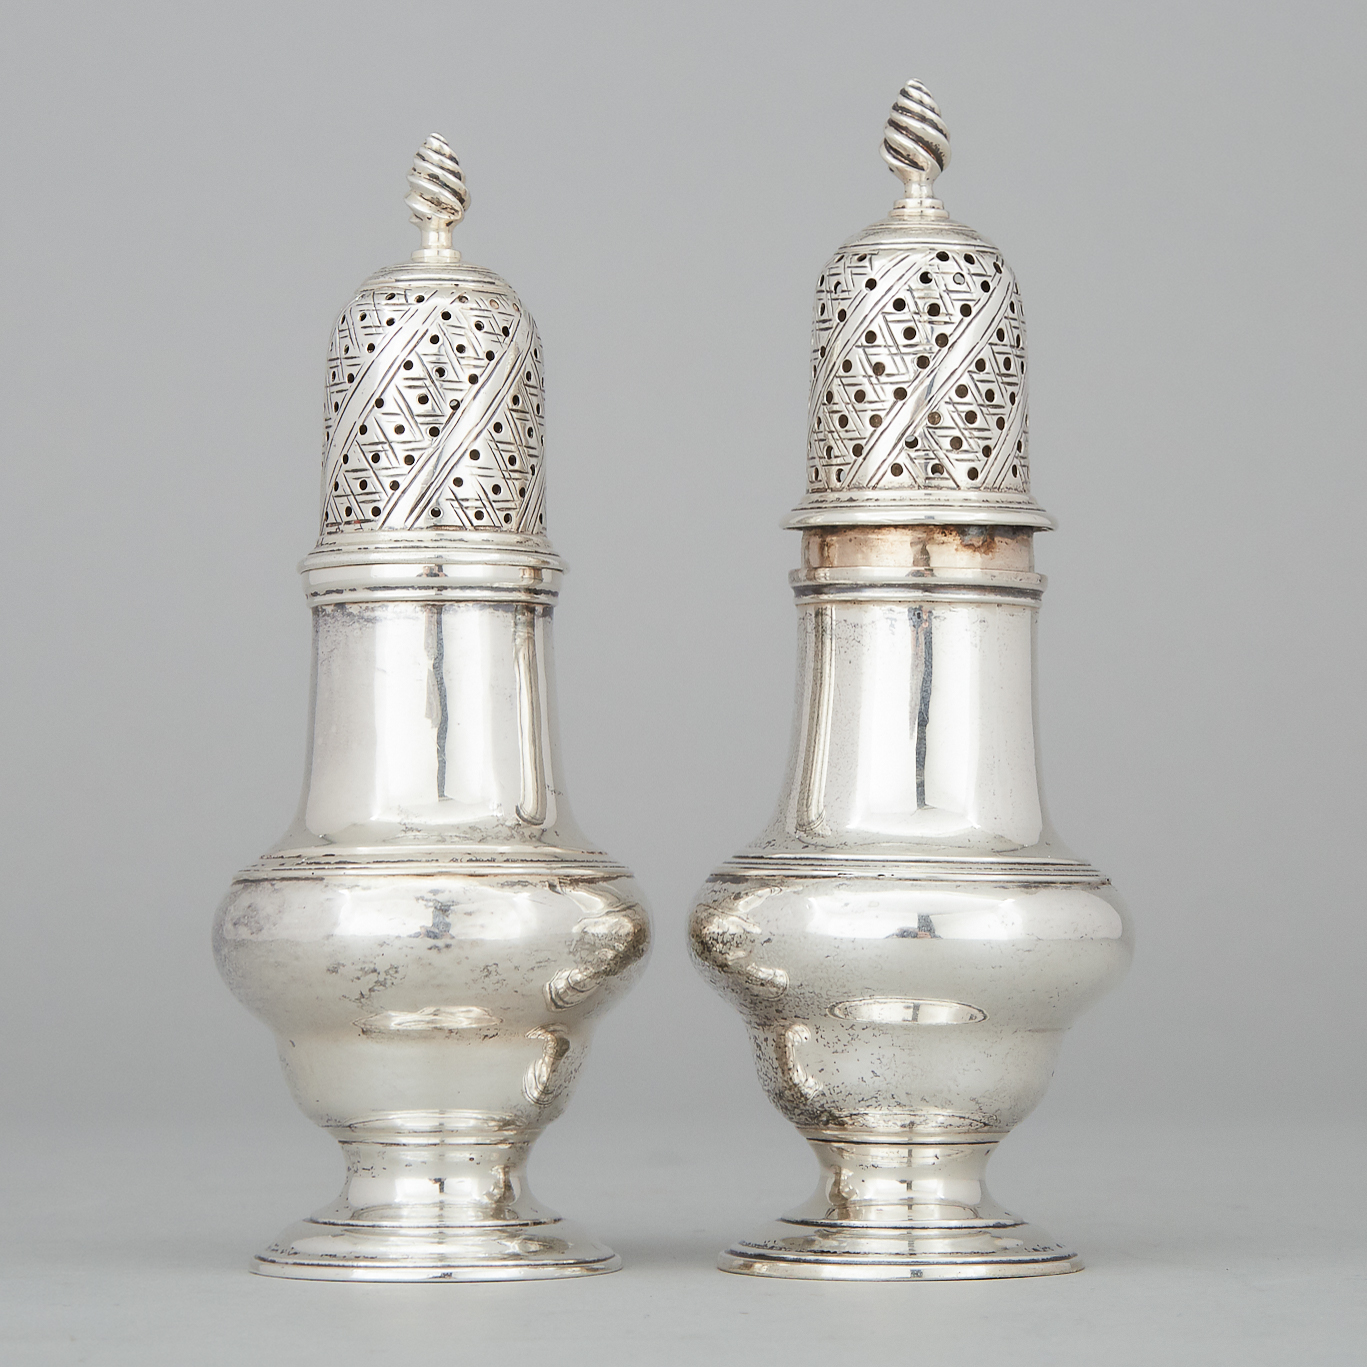 Pair of George III Silver Baluster Casters, London, 1766